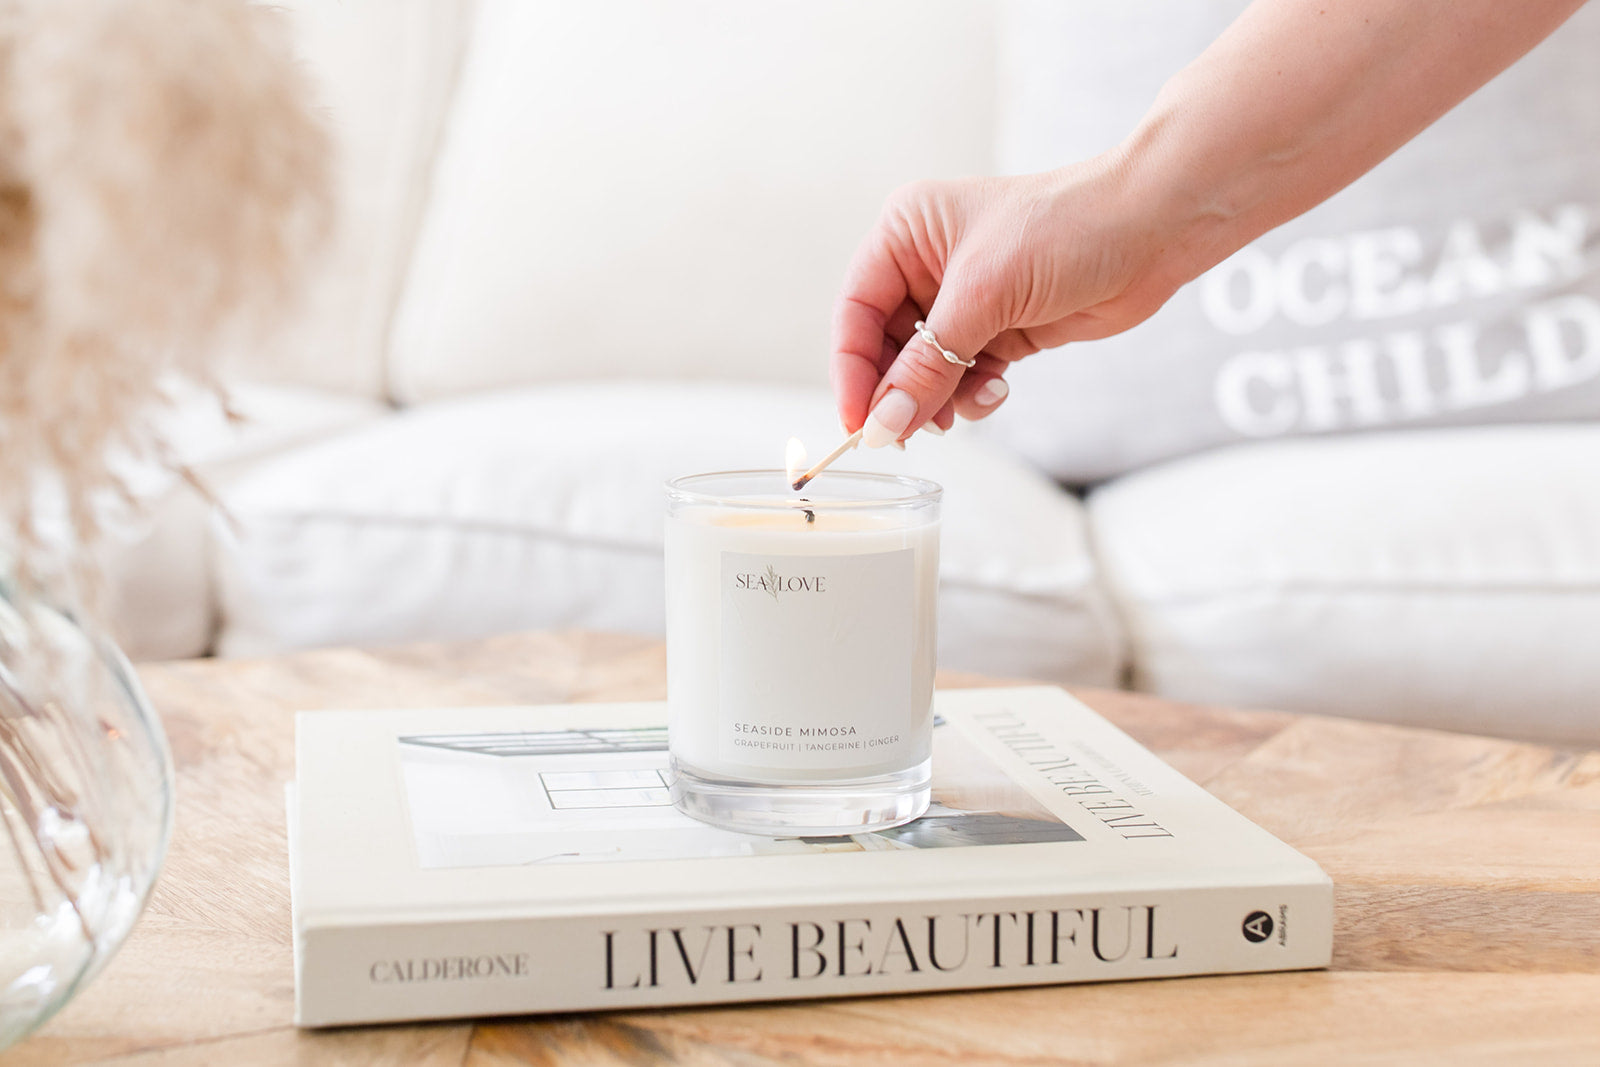 A person lighting a scented candle placed on top of an aesthetic coffee table book, creating a serene and cozy atmosphere.